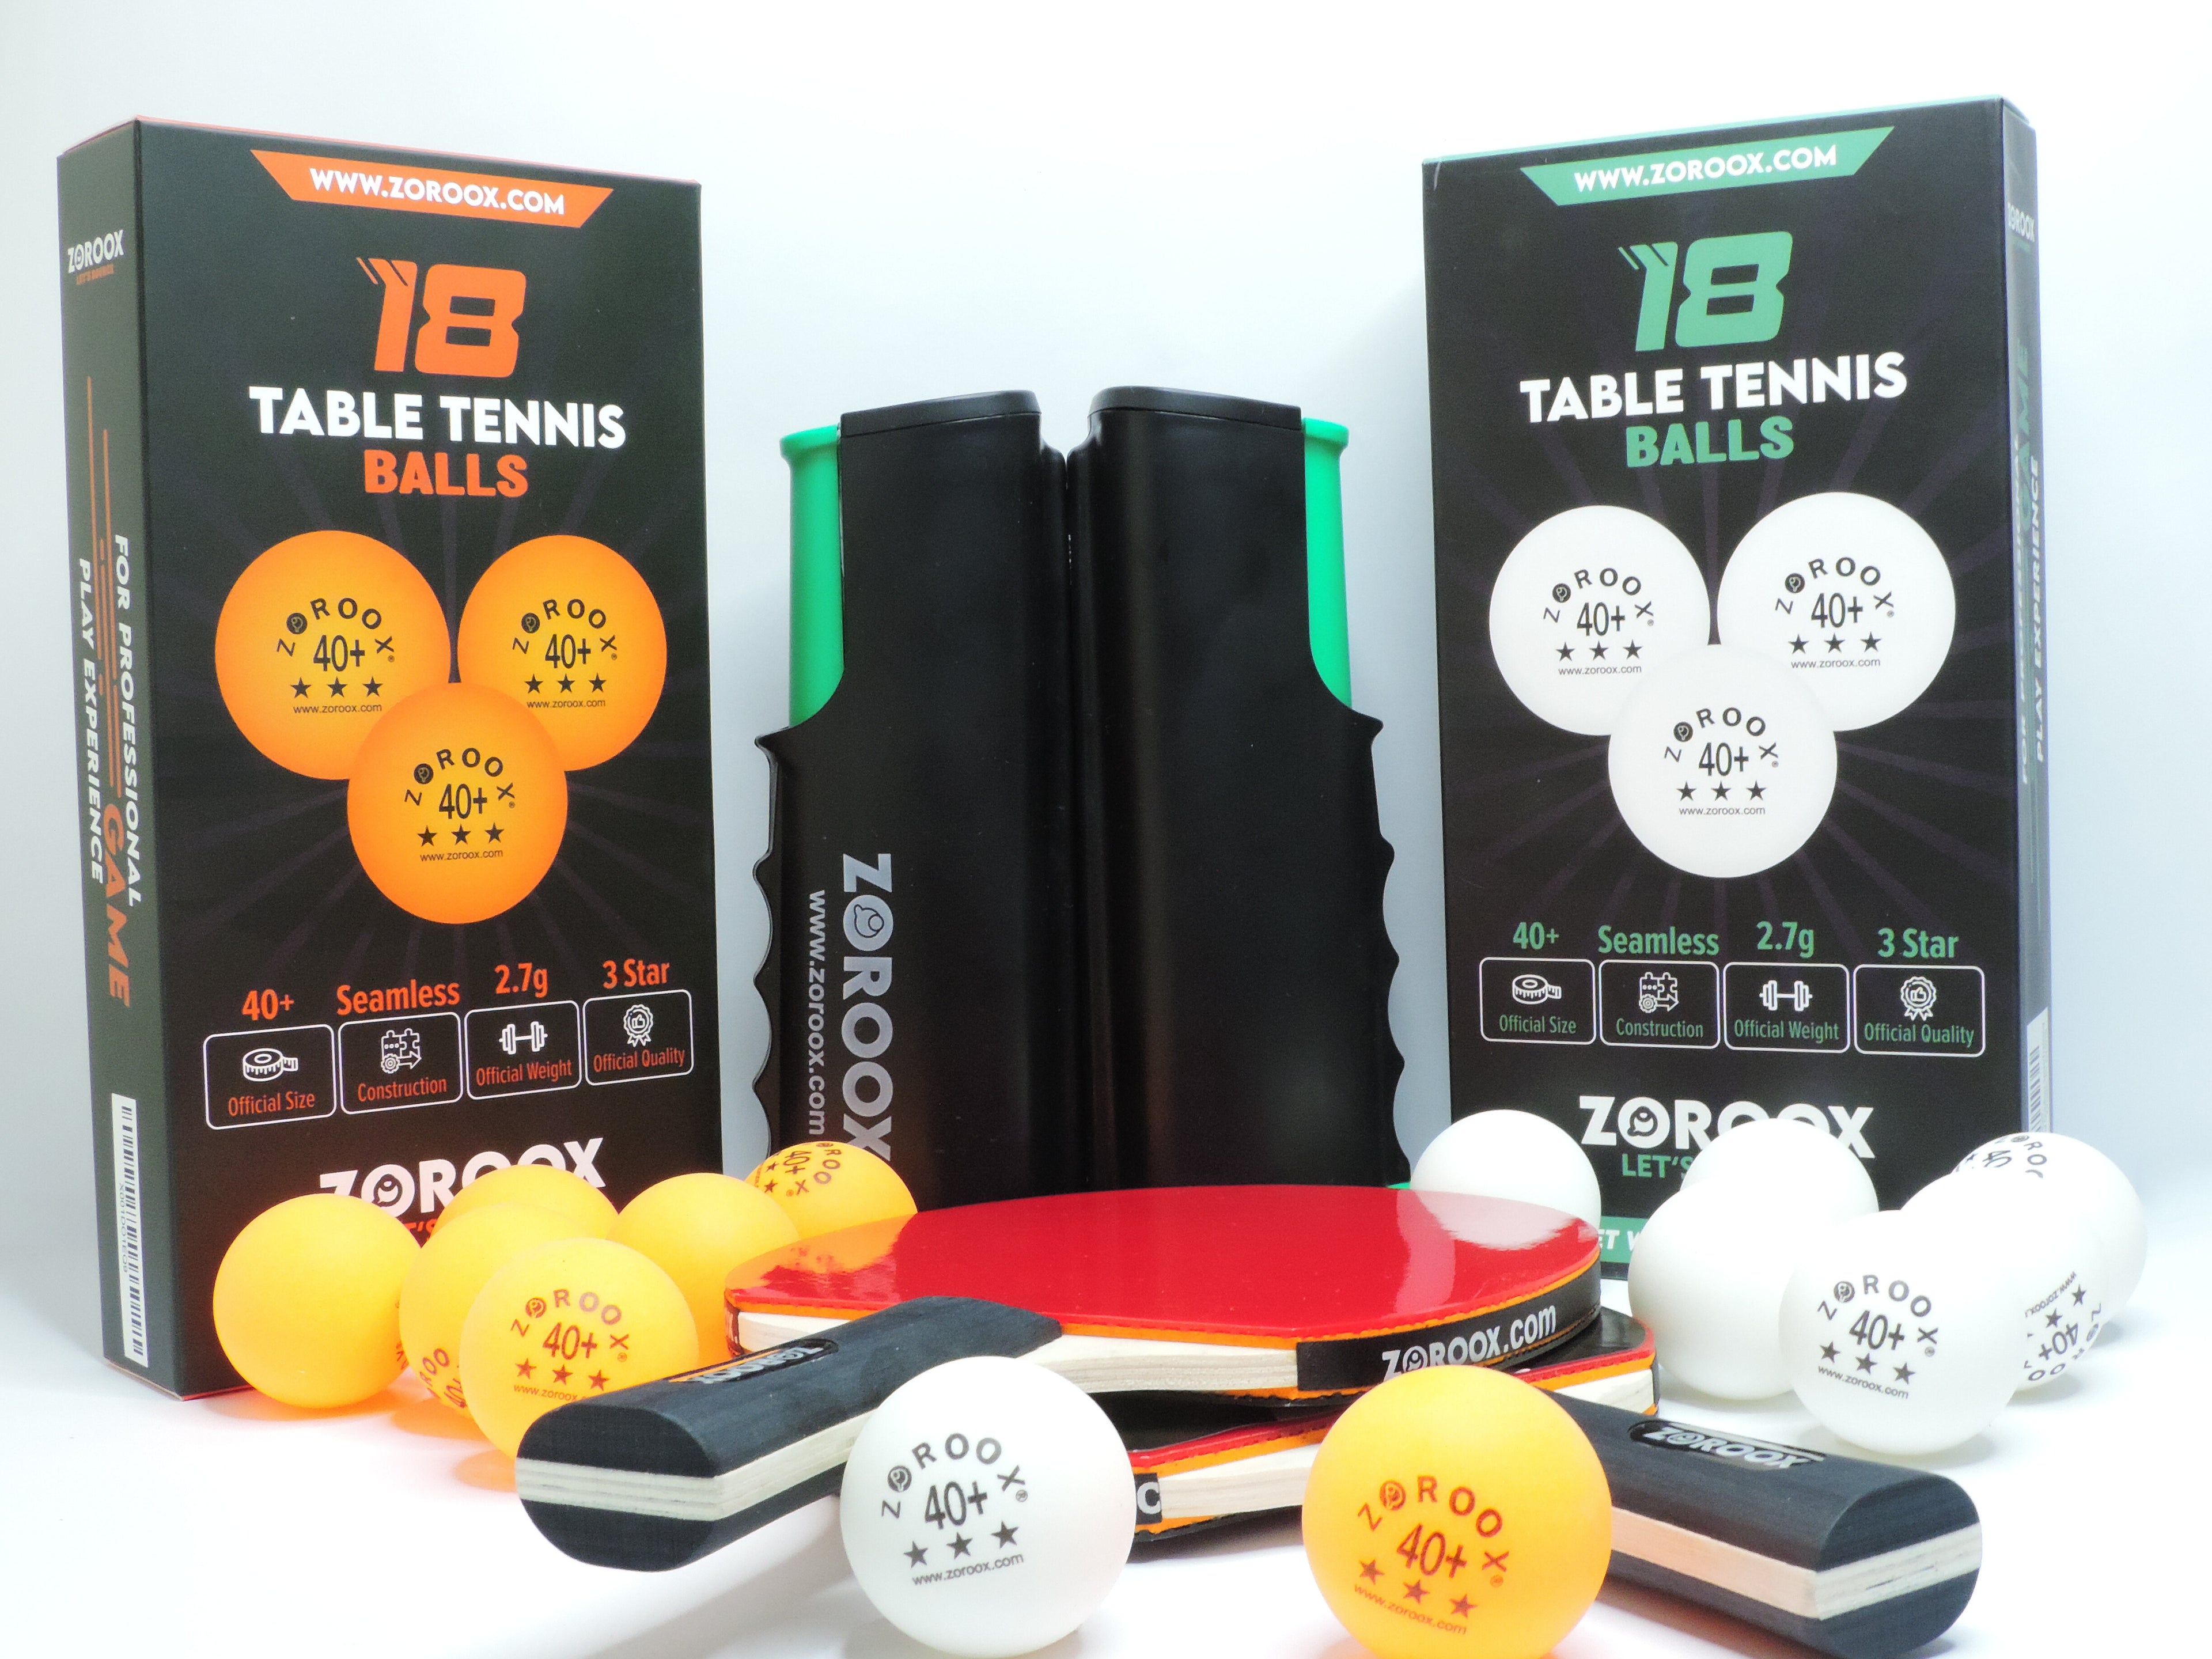 Load video: Zoroox - Professional Table Tennis Balls